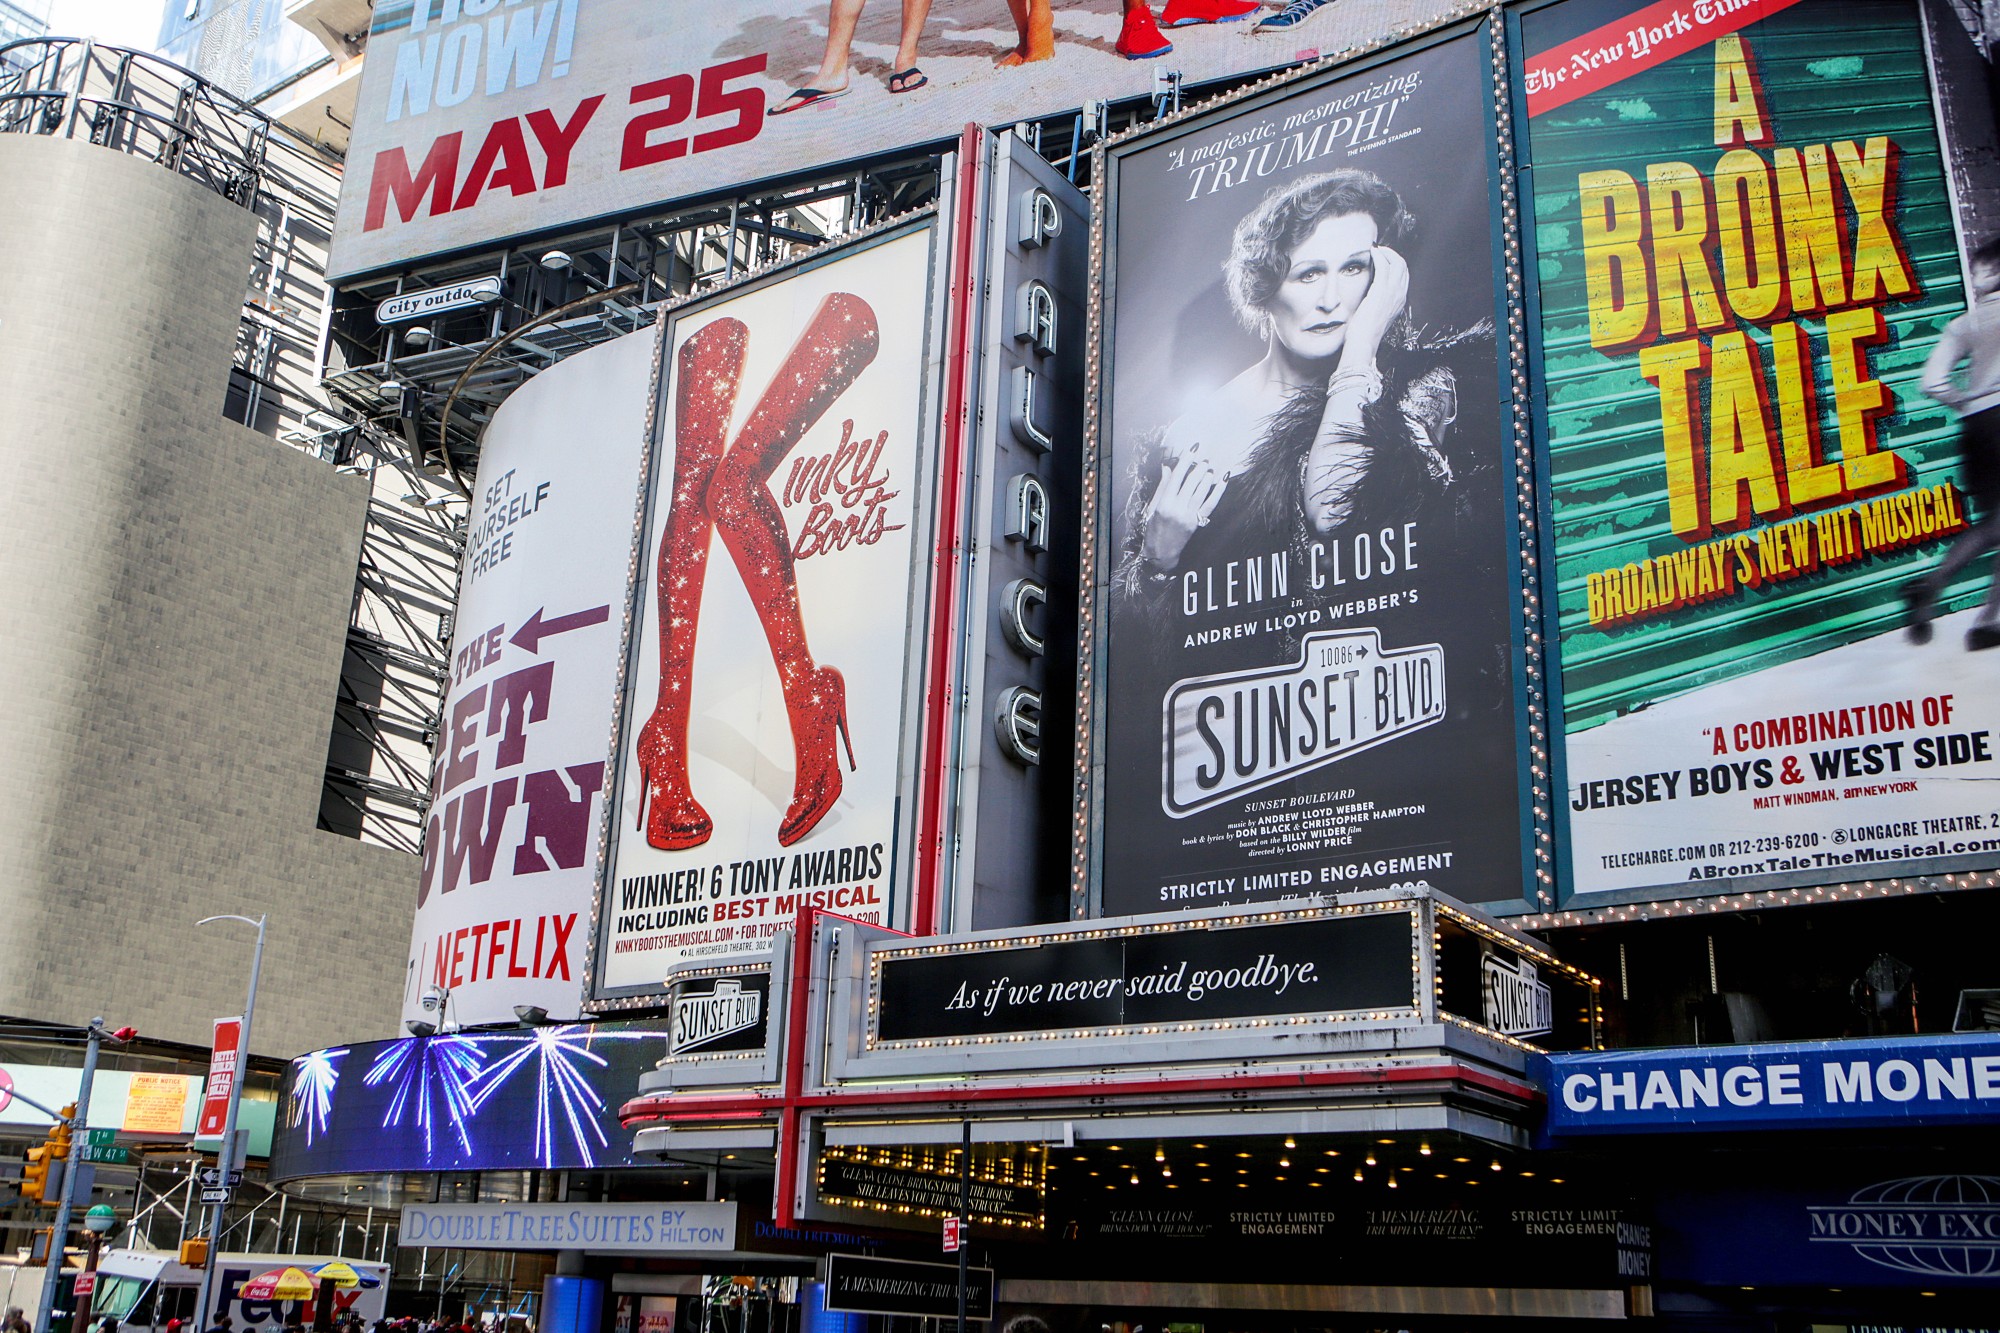 Some Broadway billboards lighting up Times Square